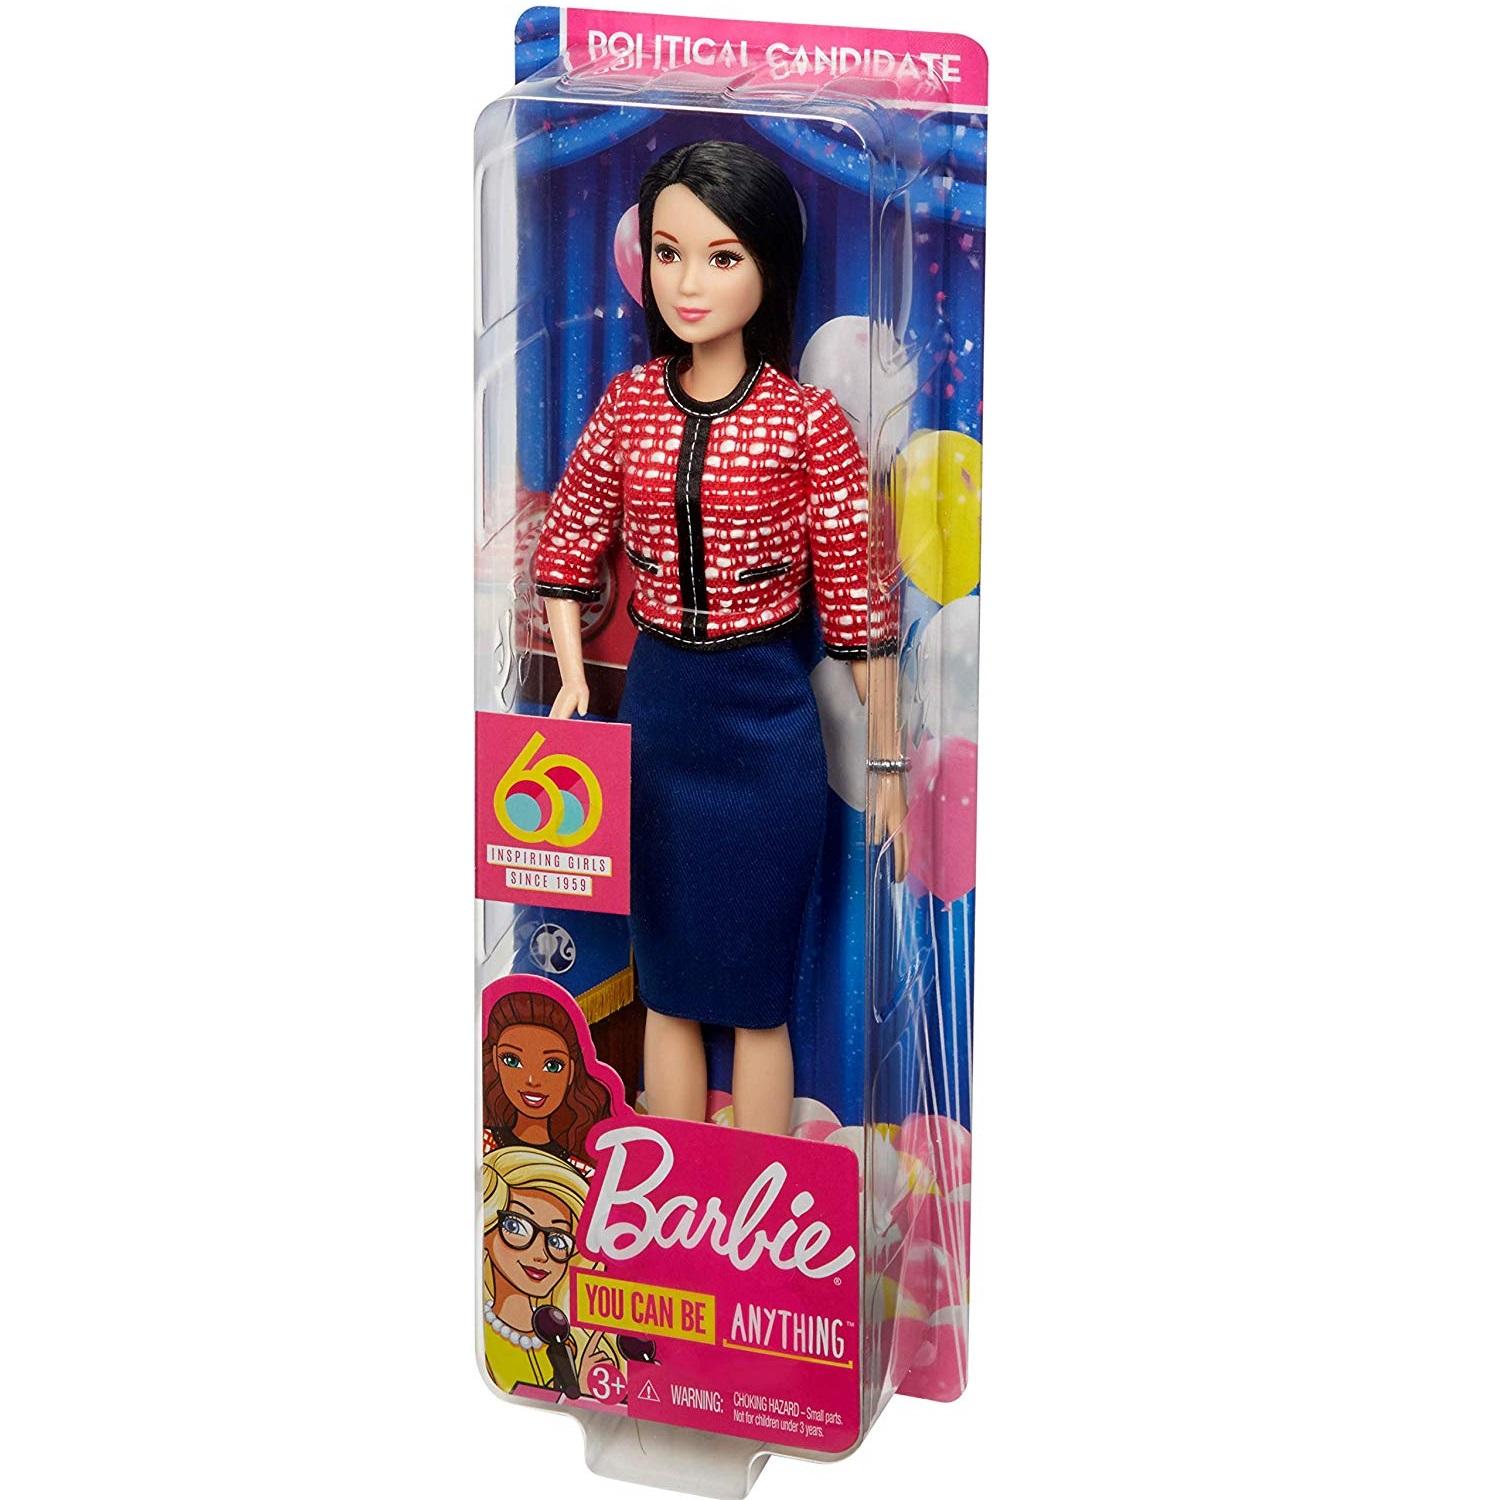 Barbie 60th Anniversary Political Candidate Doll4